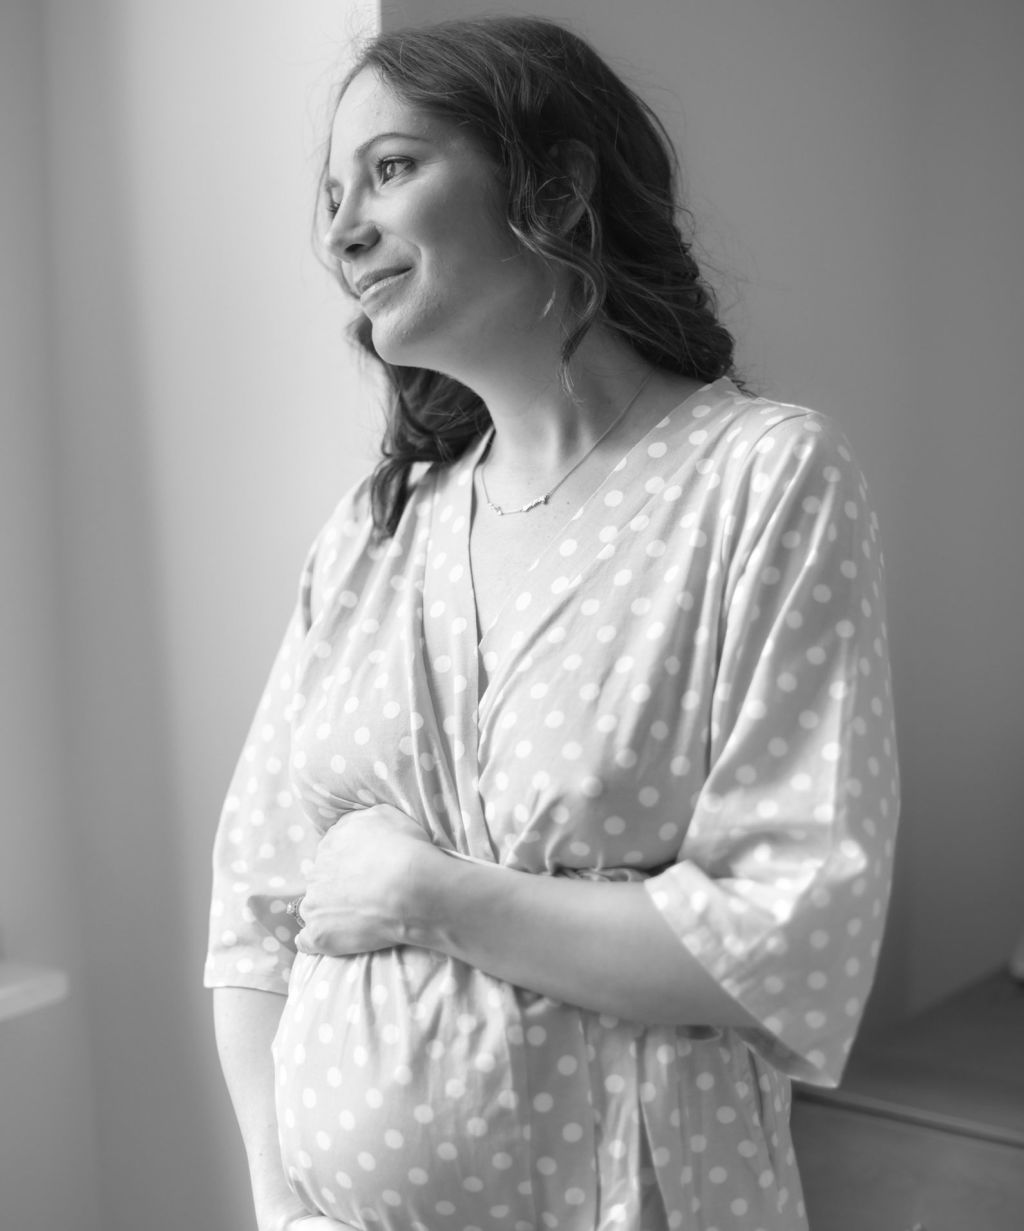 Stephanie Cartin holding her pregnant belly in a black and white photograph.